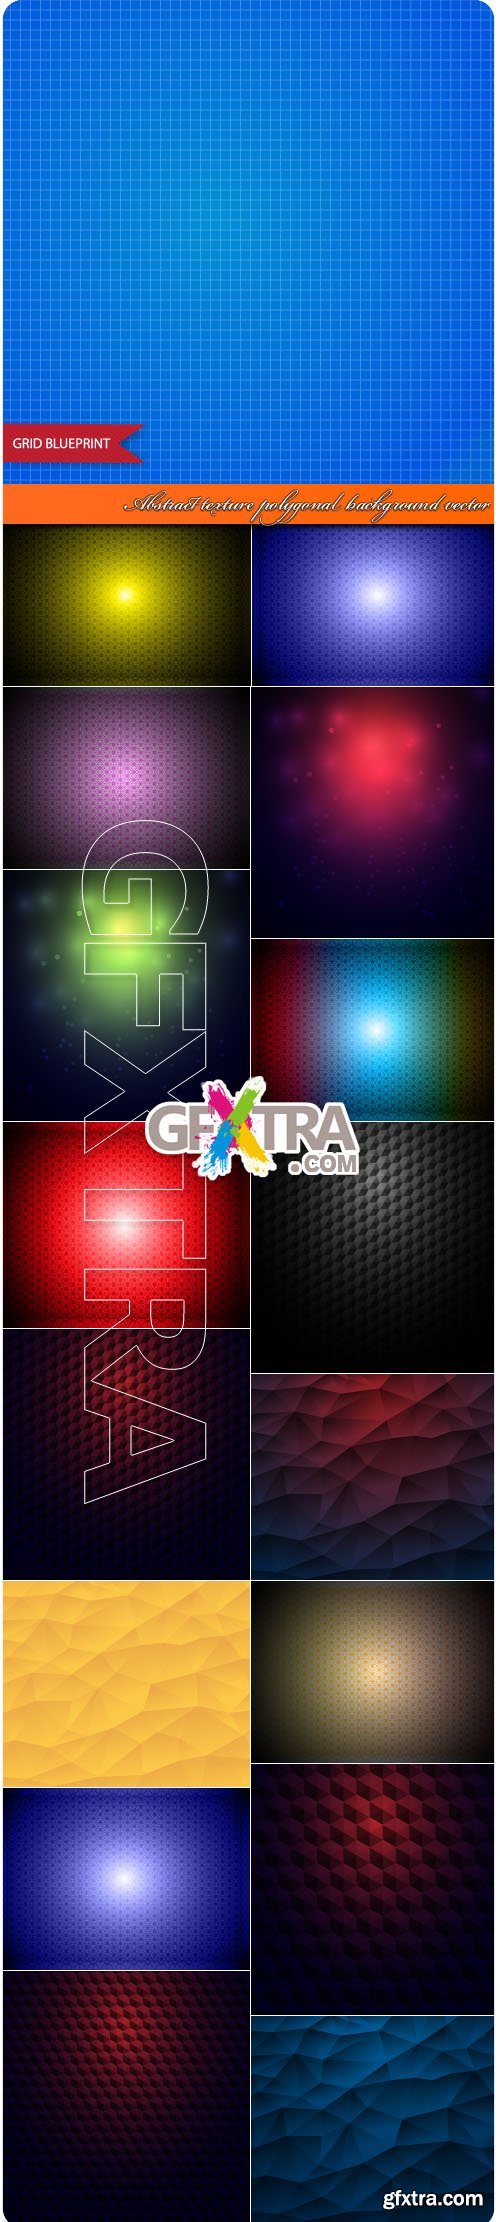 Abstract texture polygonal background vector